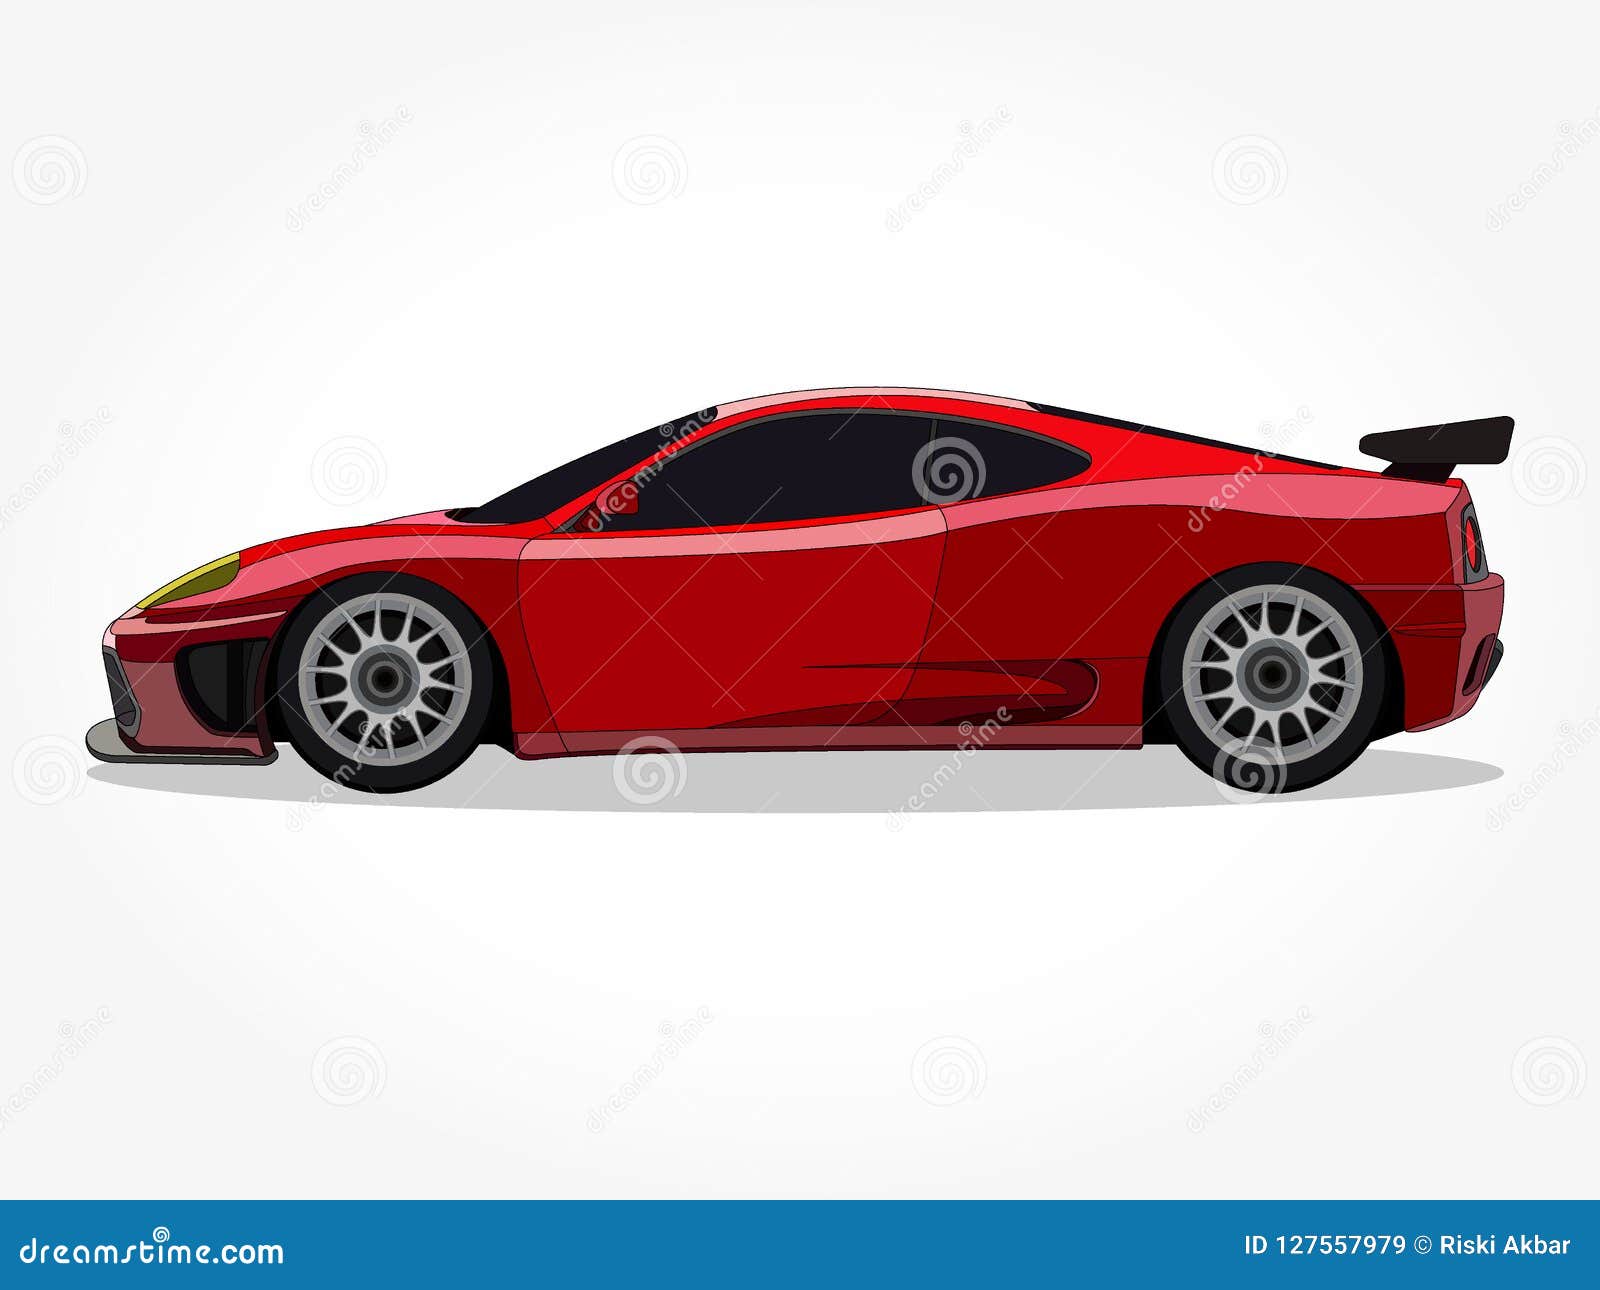 Cool Car Illustration with Details and Shadow Effect Stock Illustration -  Illustration of auto, design: 127557979